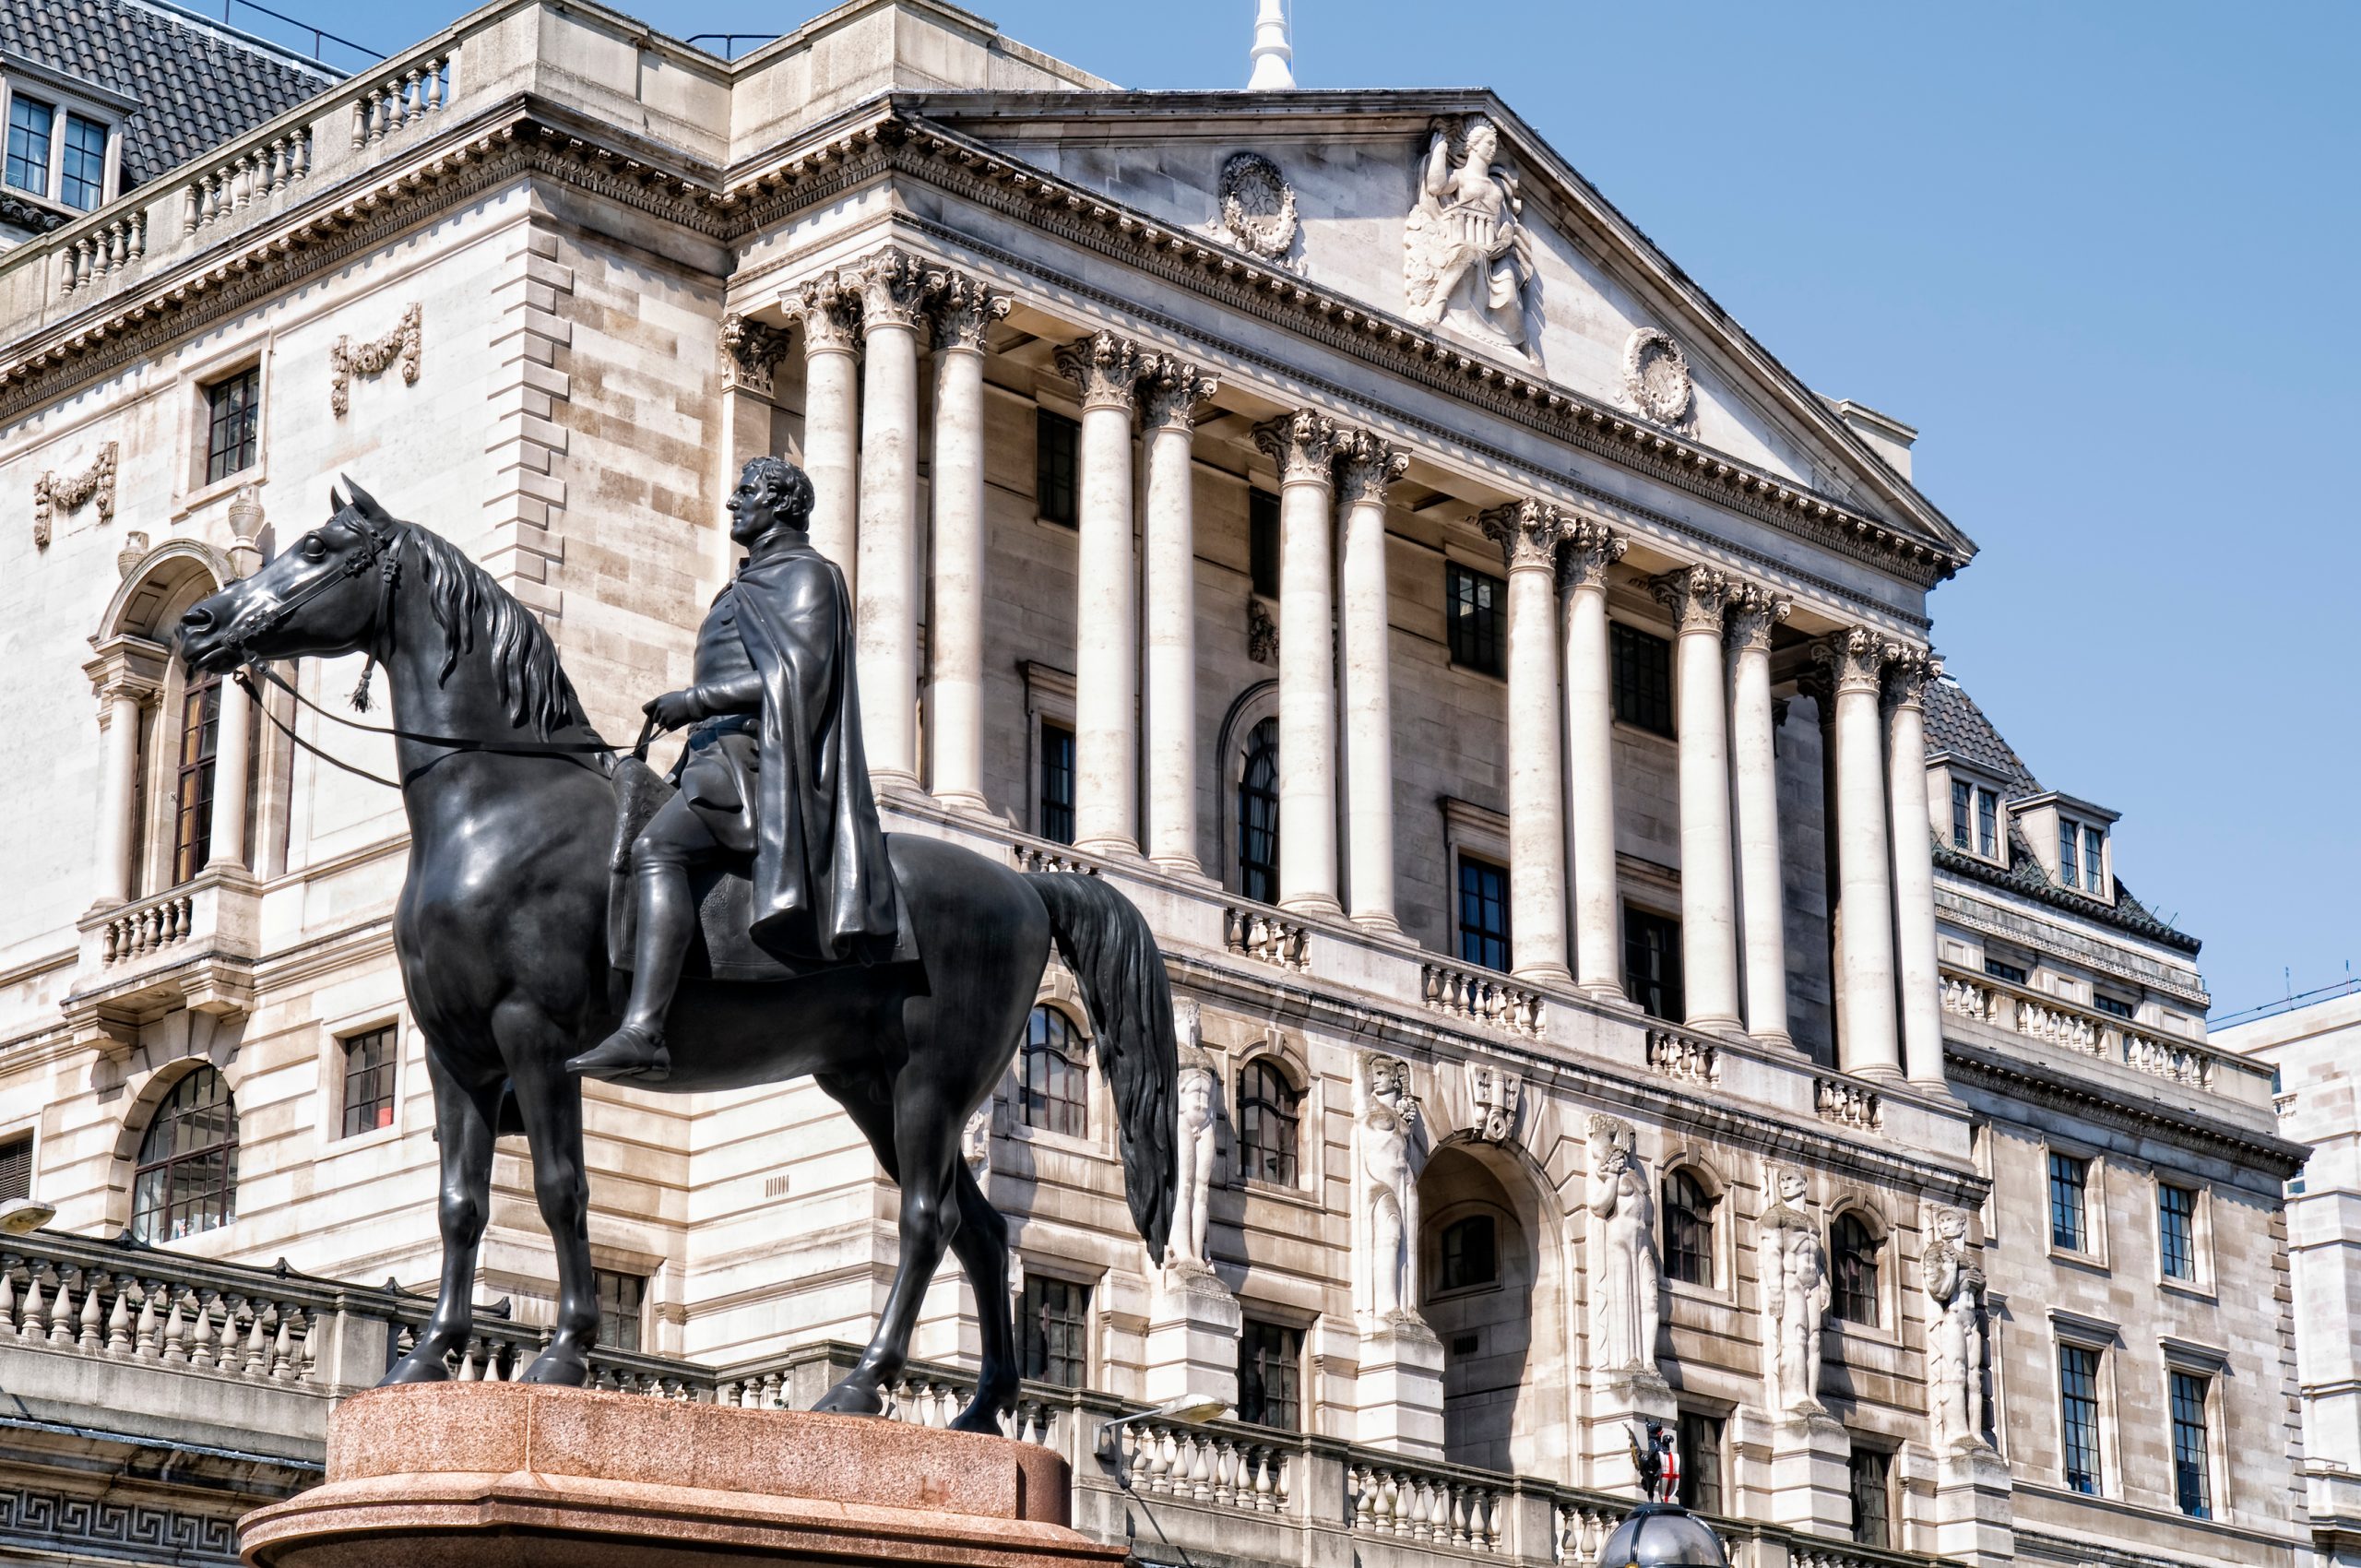 Bank of England building with a statue of a man riding a horse